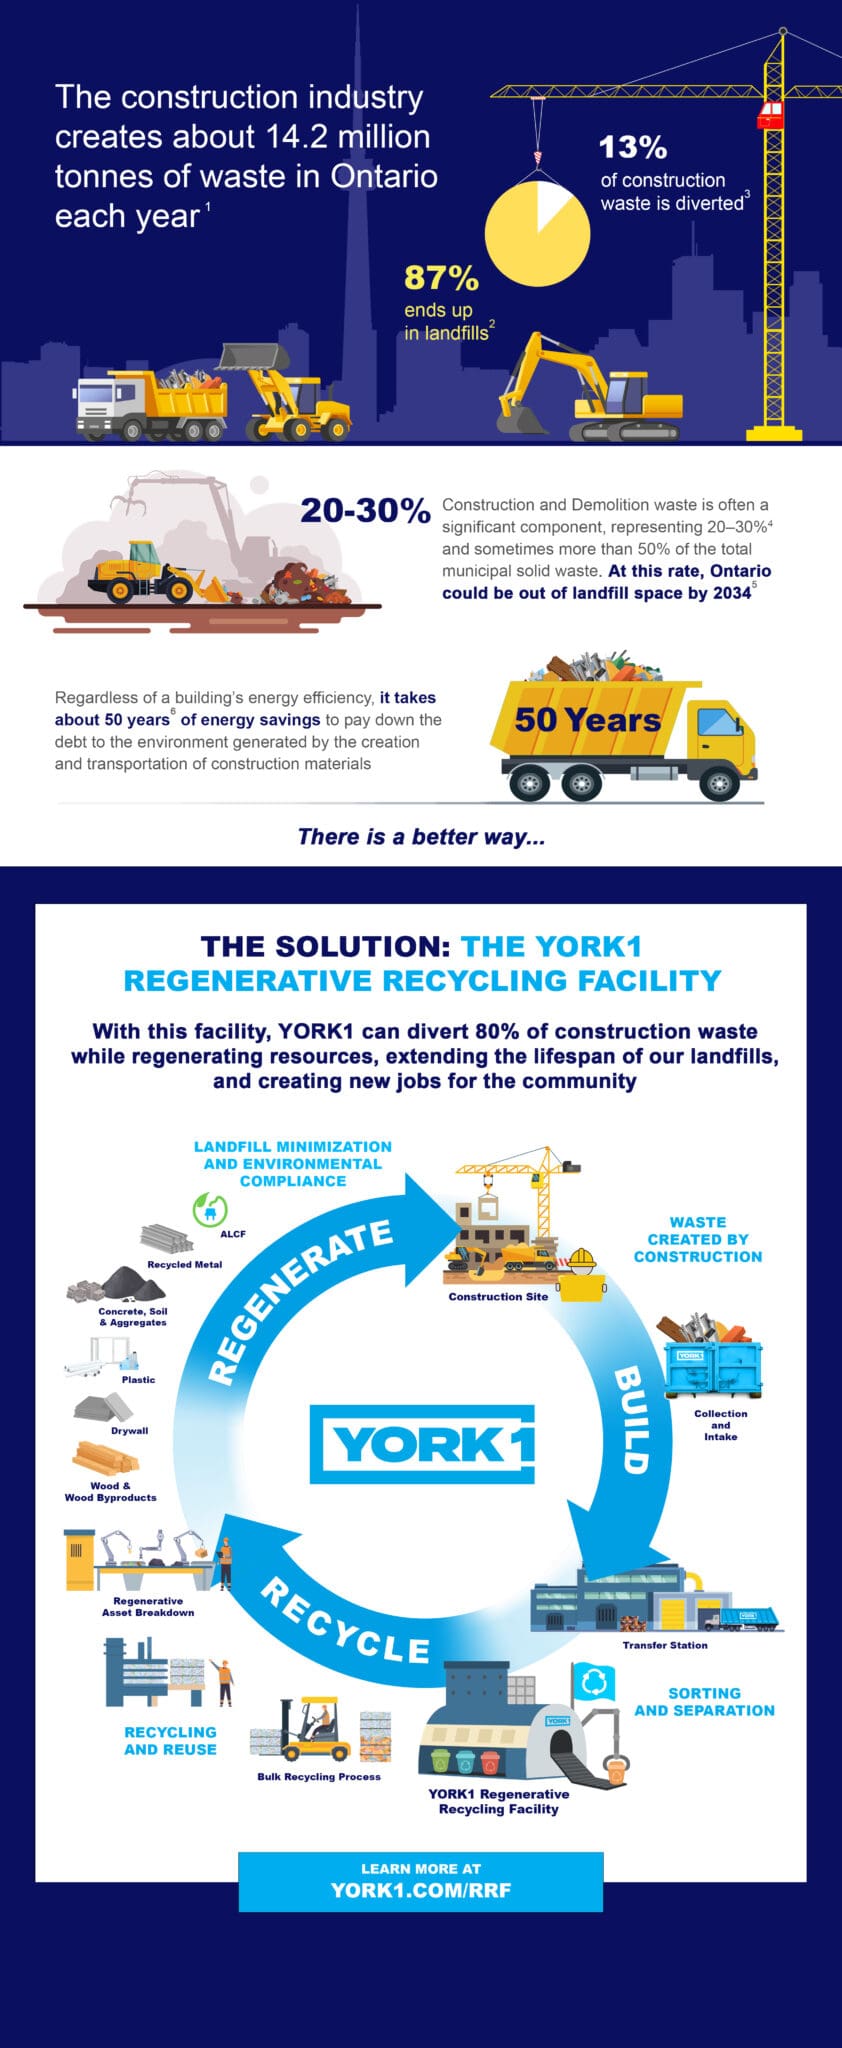 Regenerative Recycling Facility infographic showing the process and benefits of recycling construction waste into reusable resources.